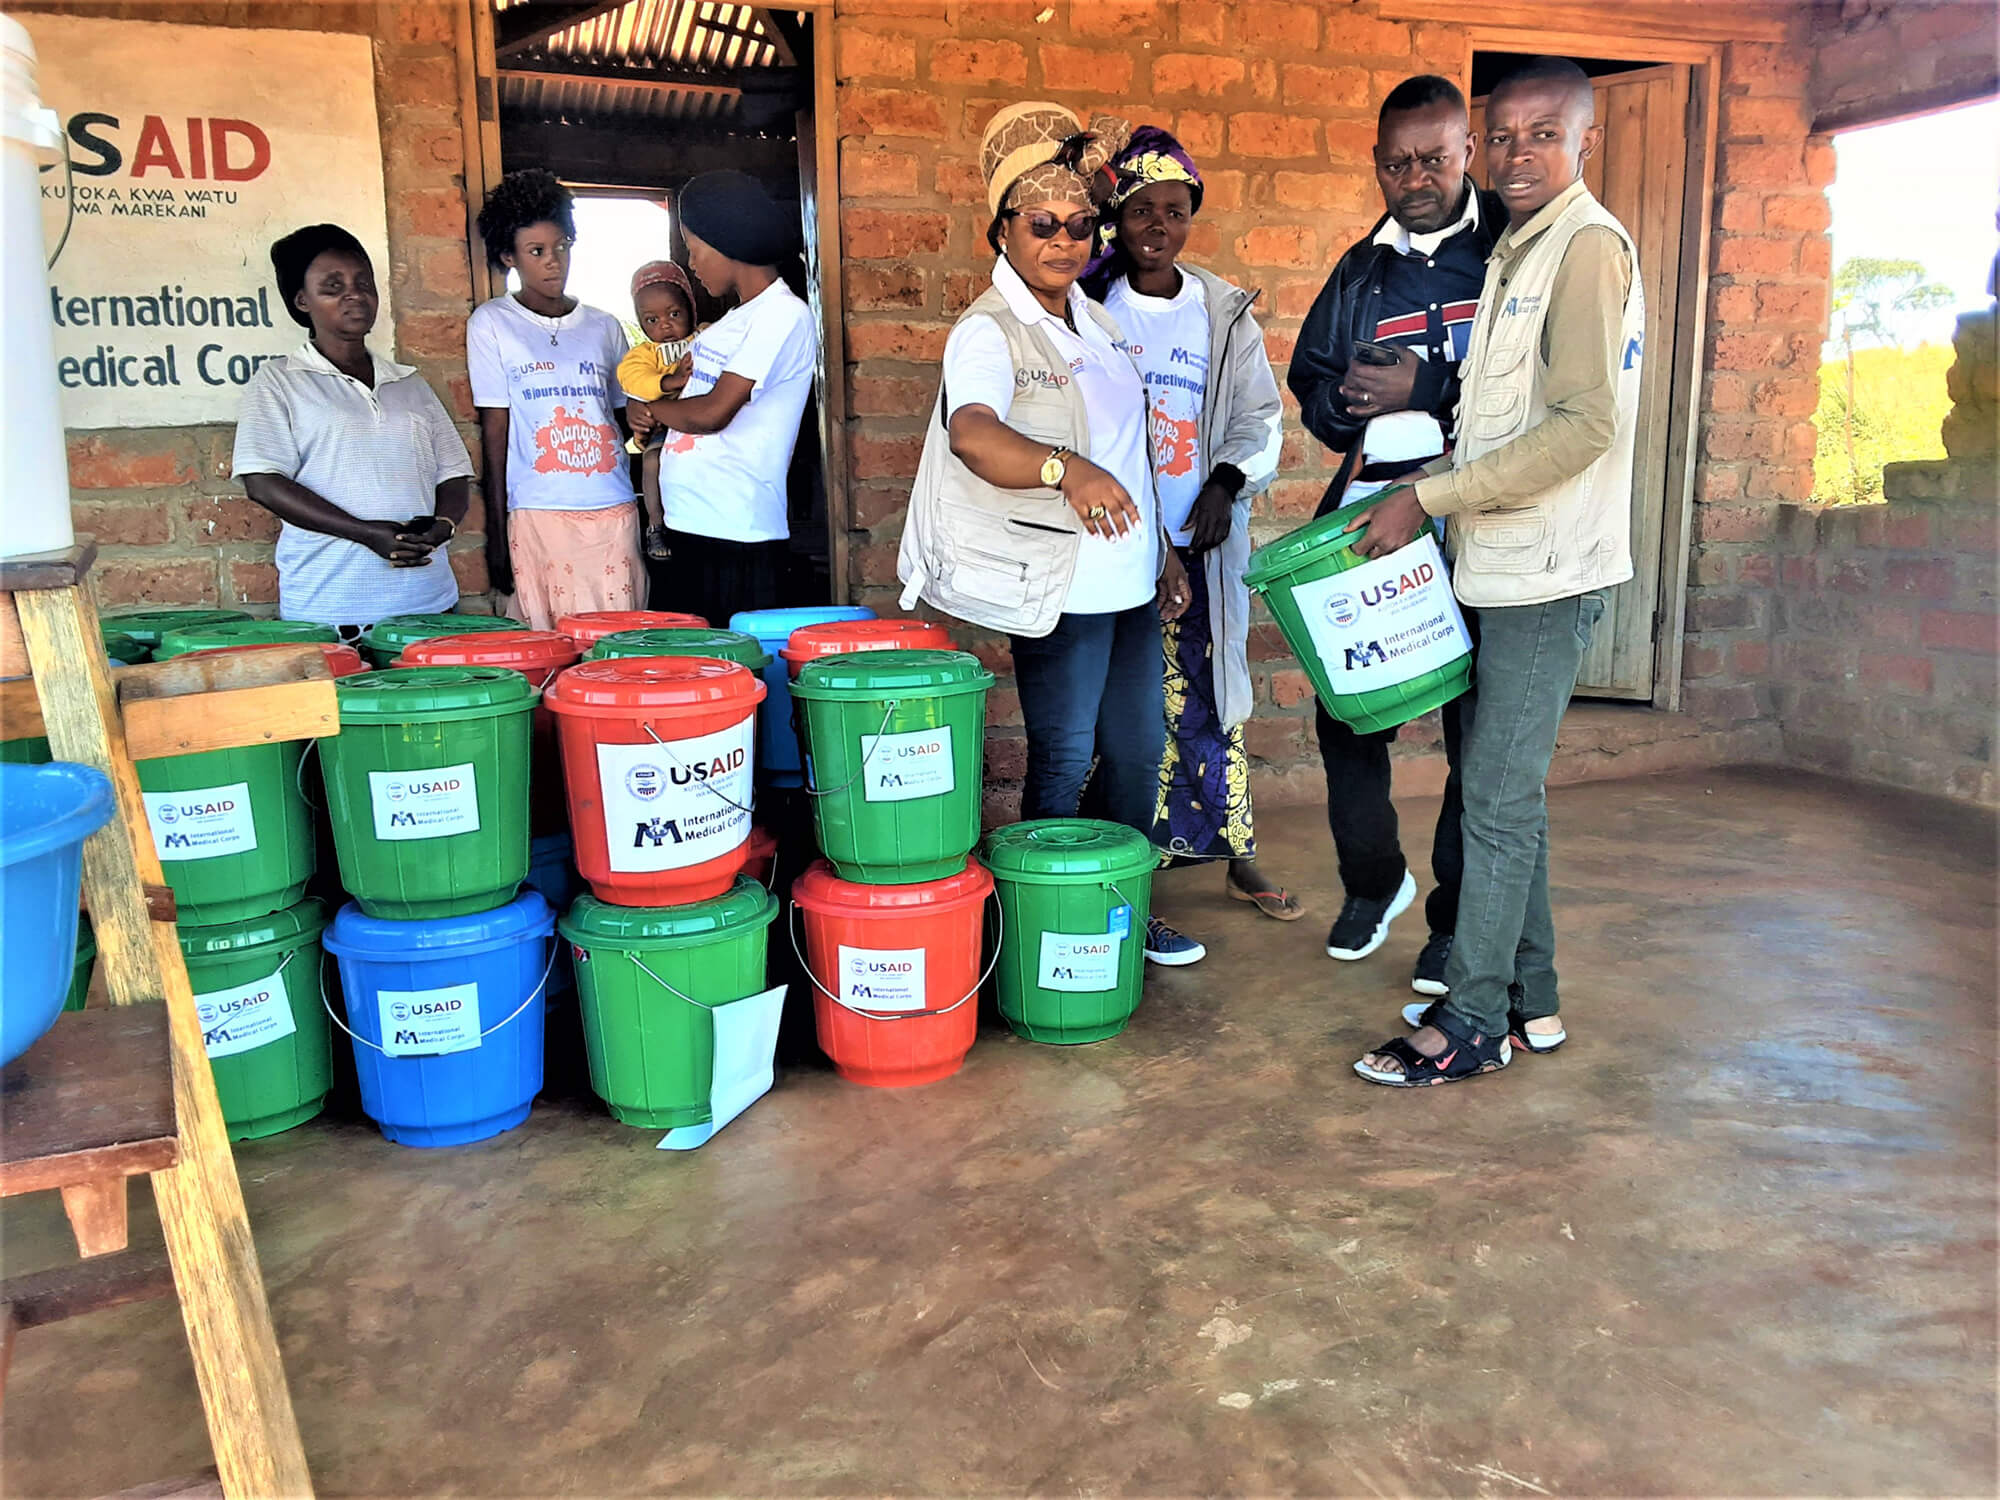 Djaile and other International Medical Corps staff prepare to distribute hygiene kits to victims of gender-based violence.